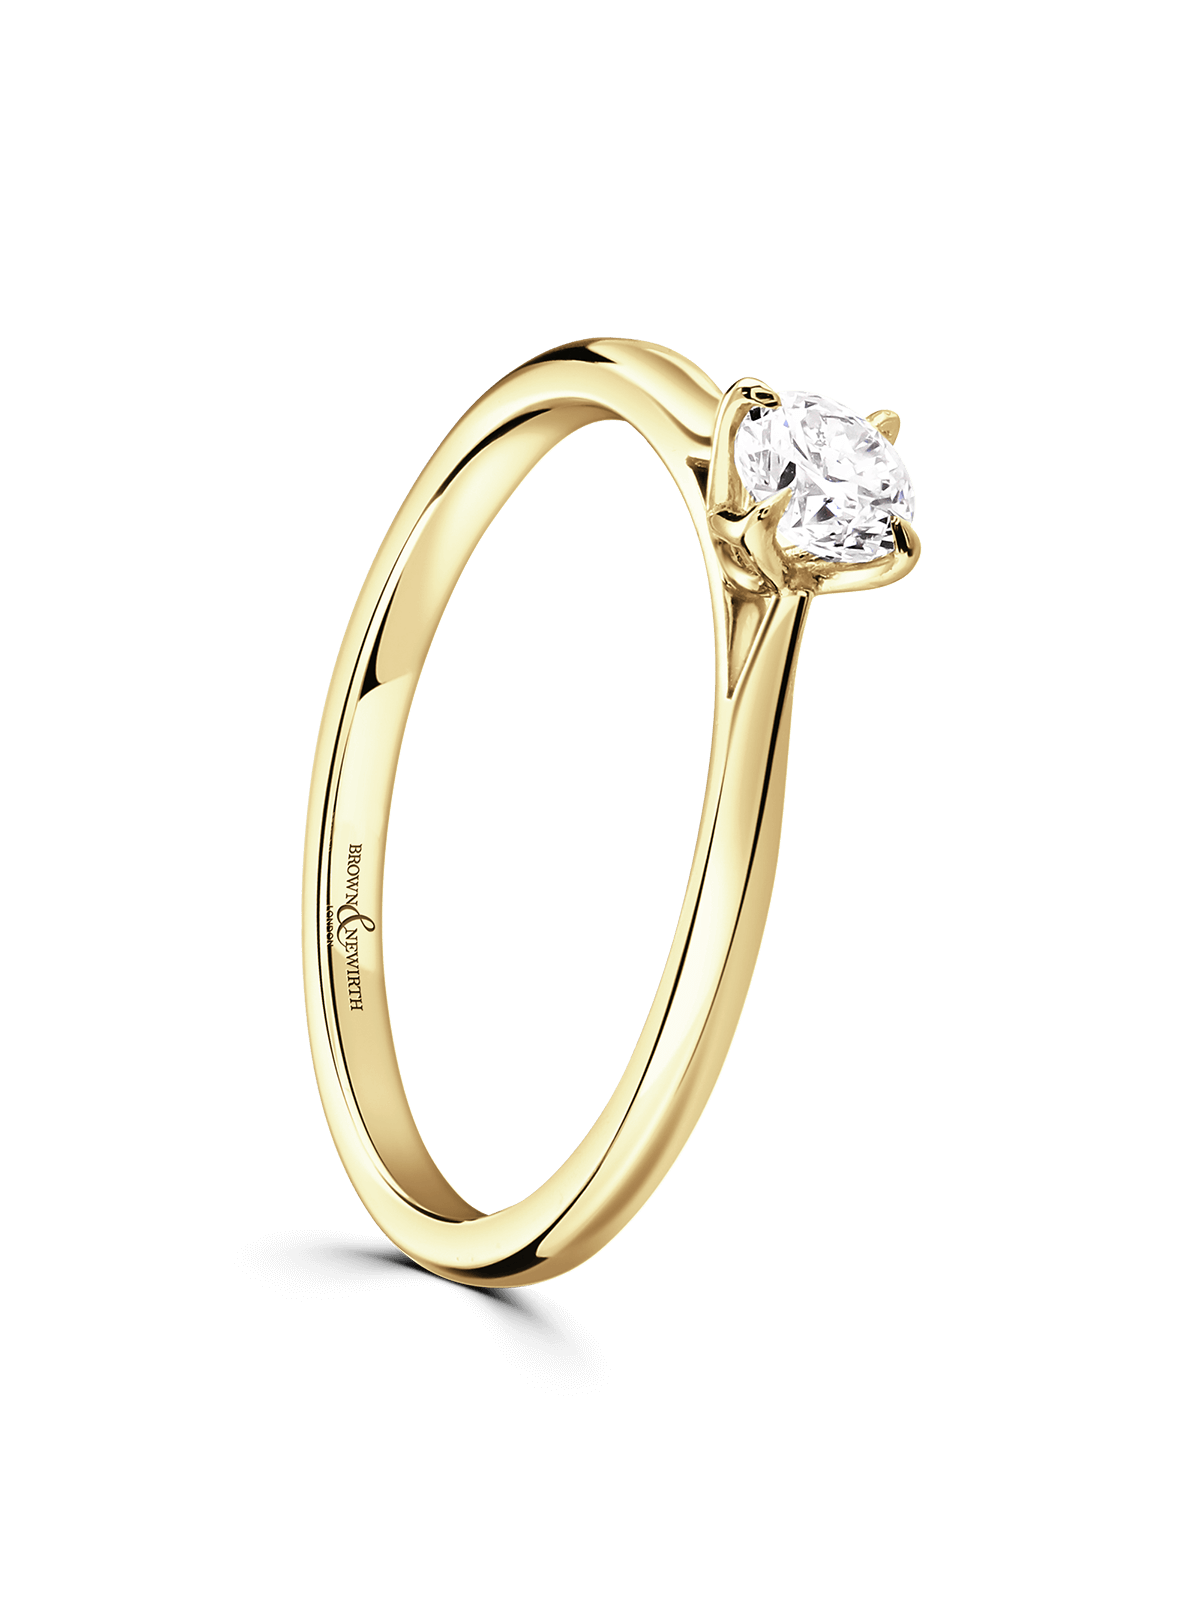 Brown & Newirth Magnolia 0.25ct Brilliant Cut Diamond Solitaire Engagement Ring in 9ct Yellow Gold